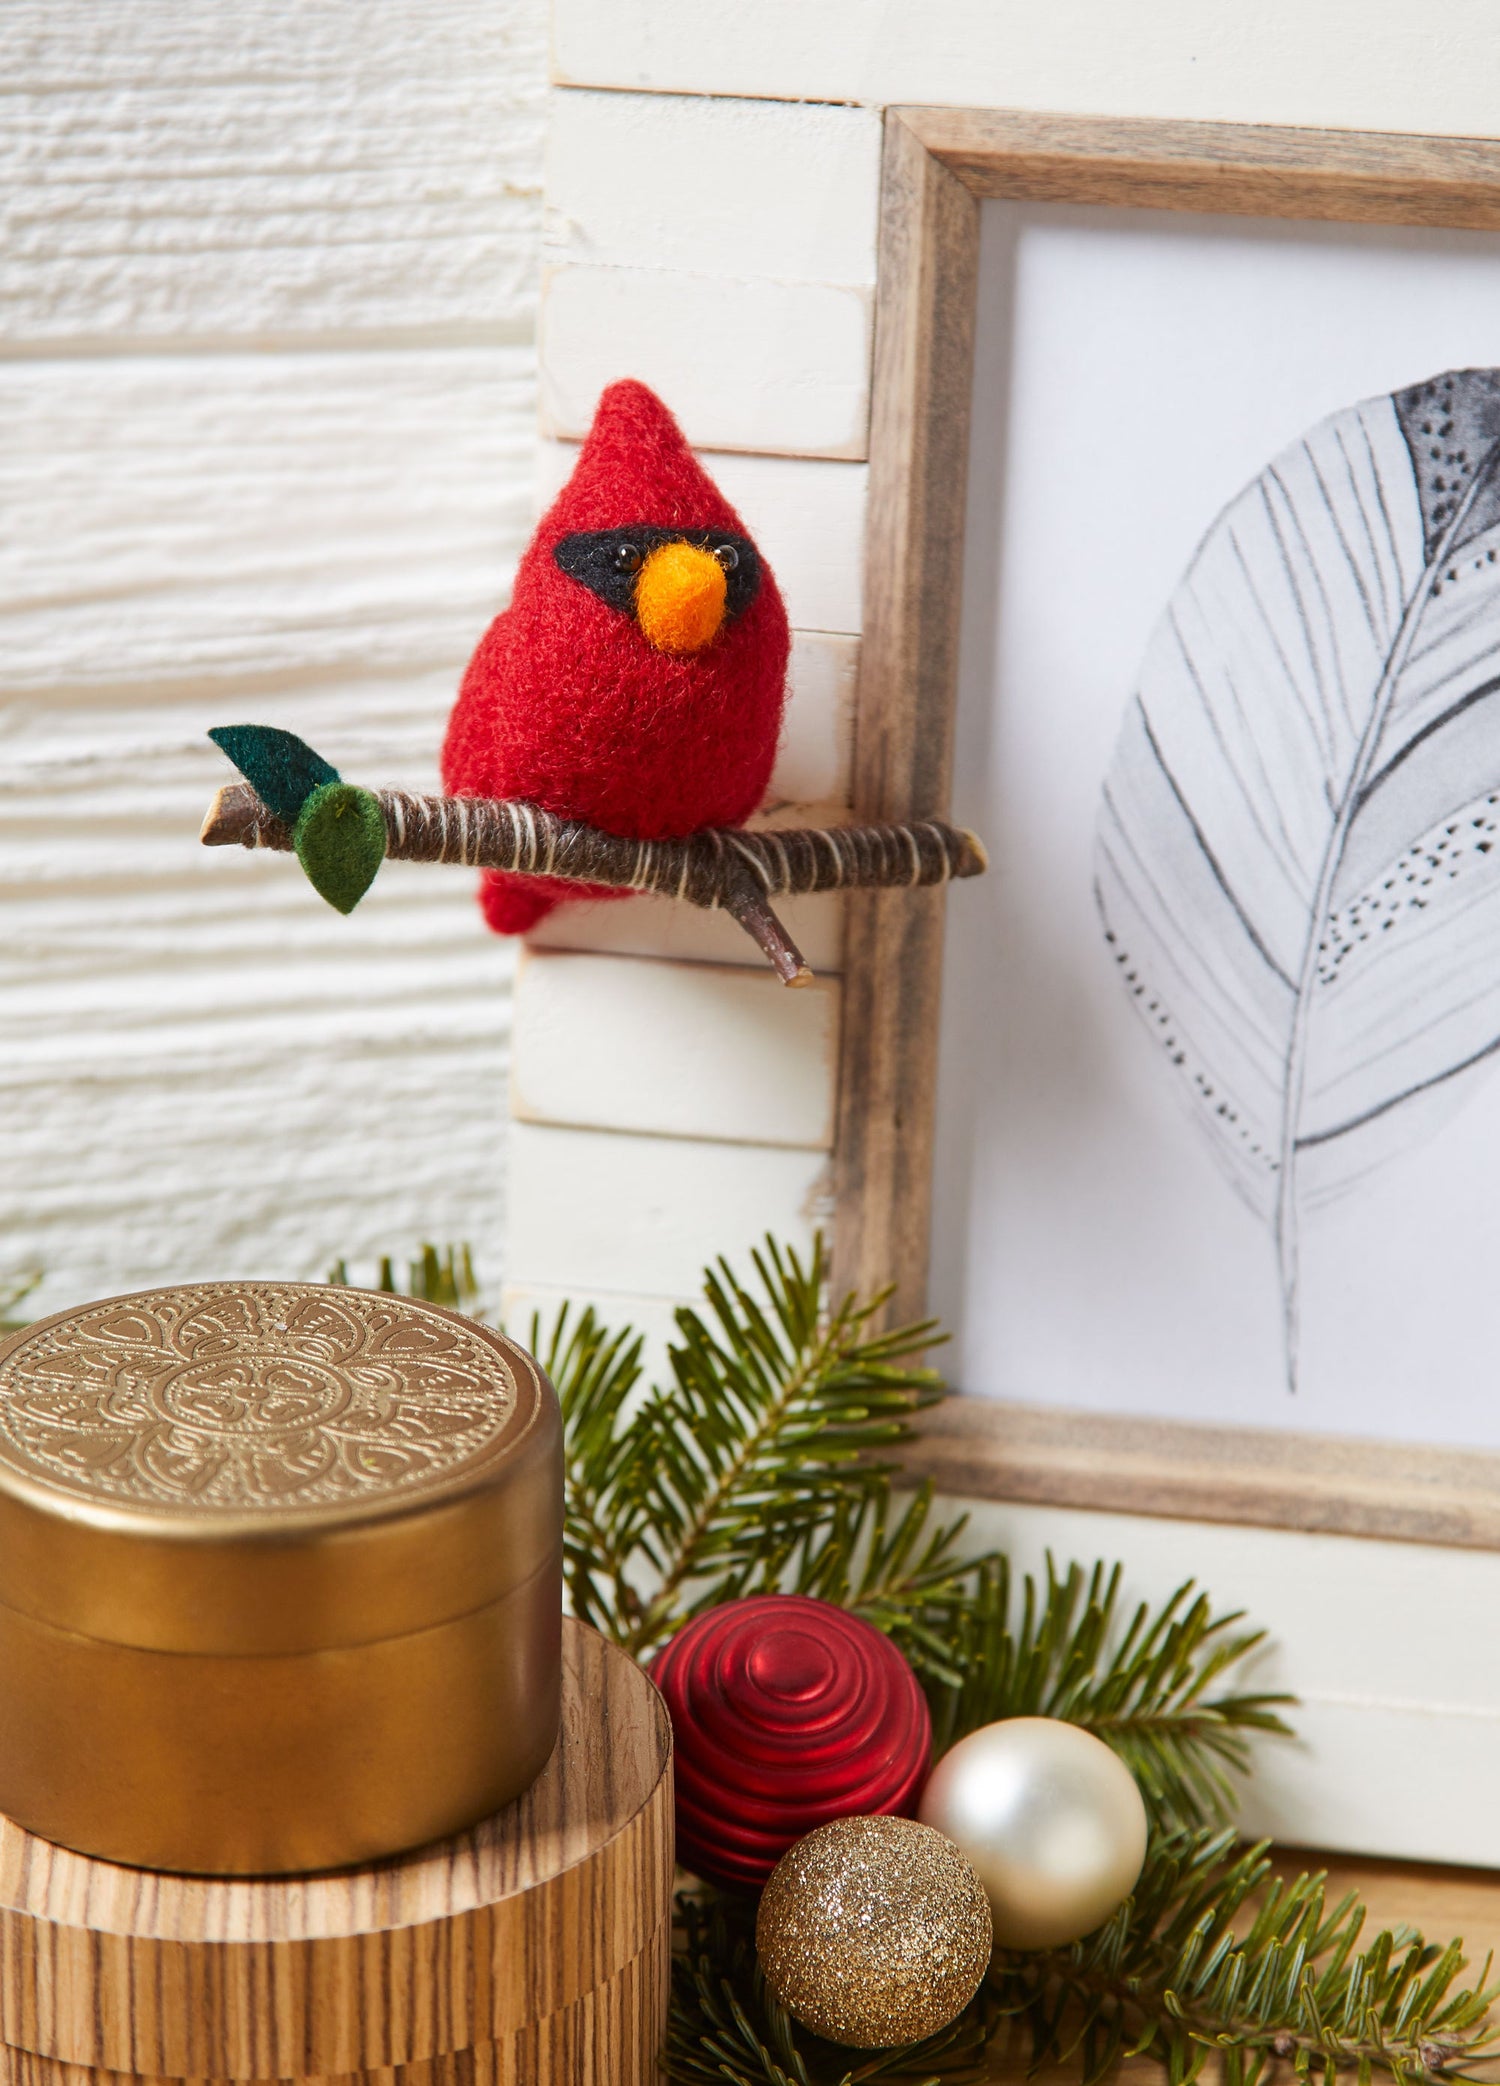 Holiday decor scene with white wood background, two golden tins on table, picture frame with pencil-drawn leaf art, and a needle-felted three-inch cardinal bird ornament